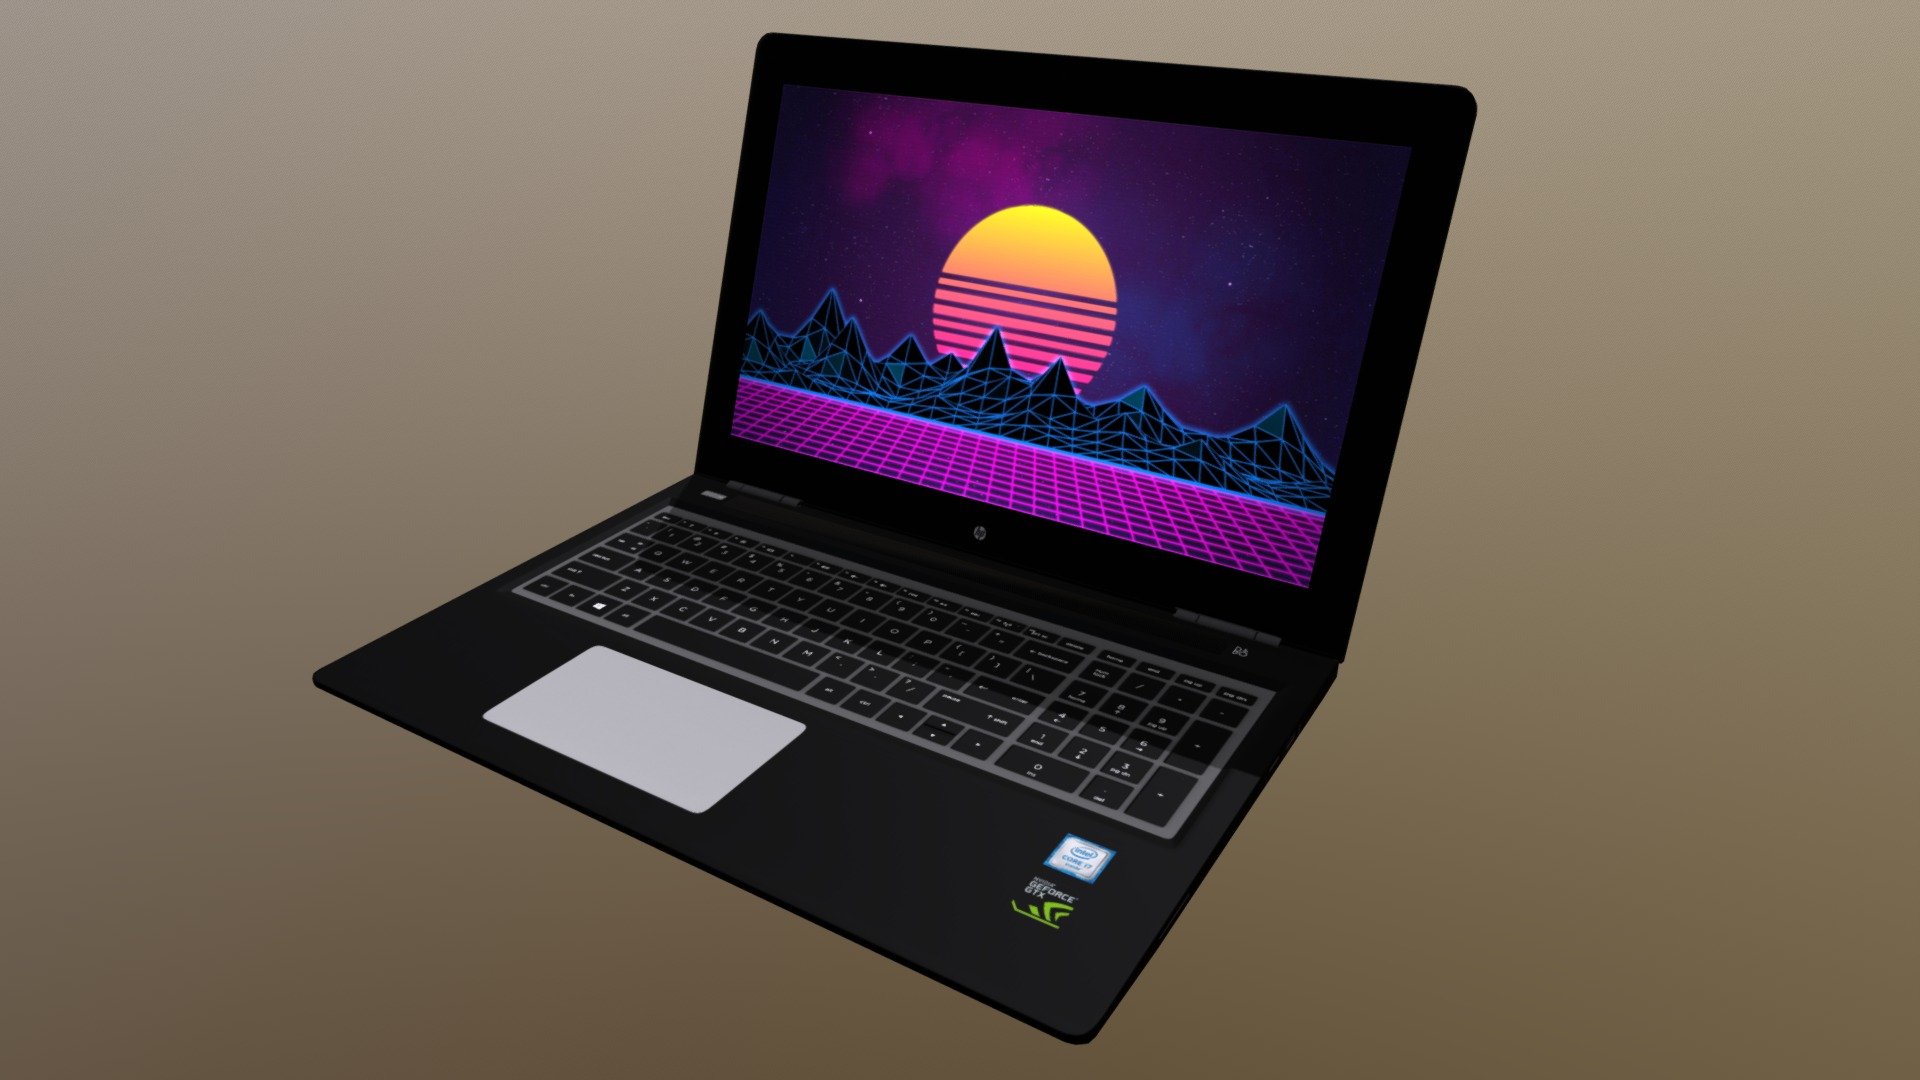 Lowpoly Laptop I made to practise baking normal maps. Turned out better then expected - Laptop - 3D model by mikes8899 3d model